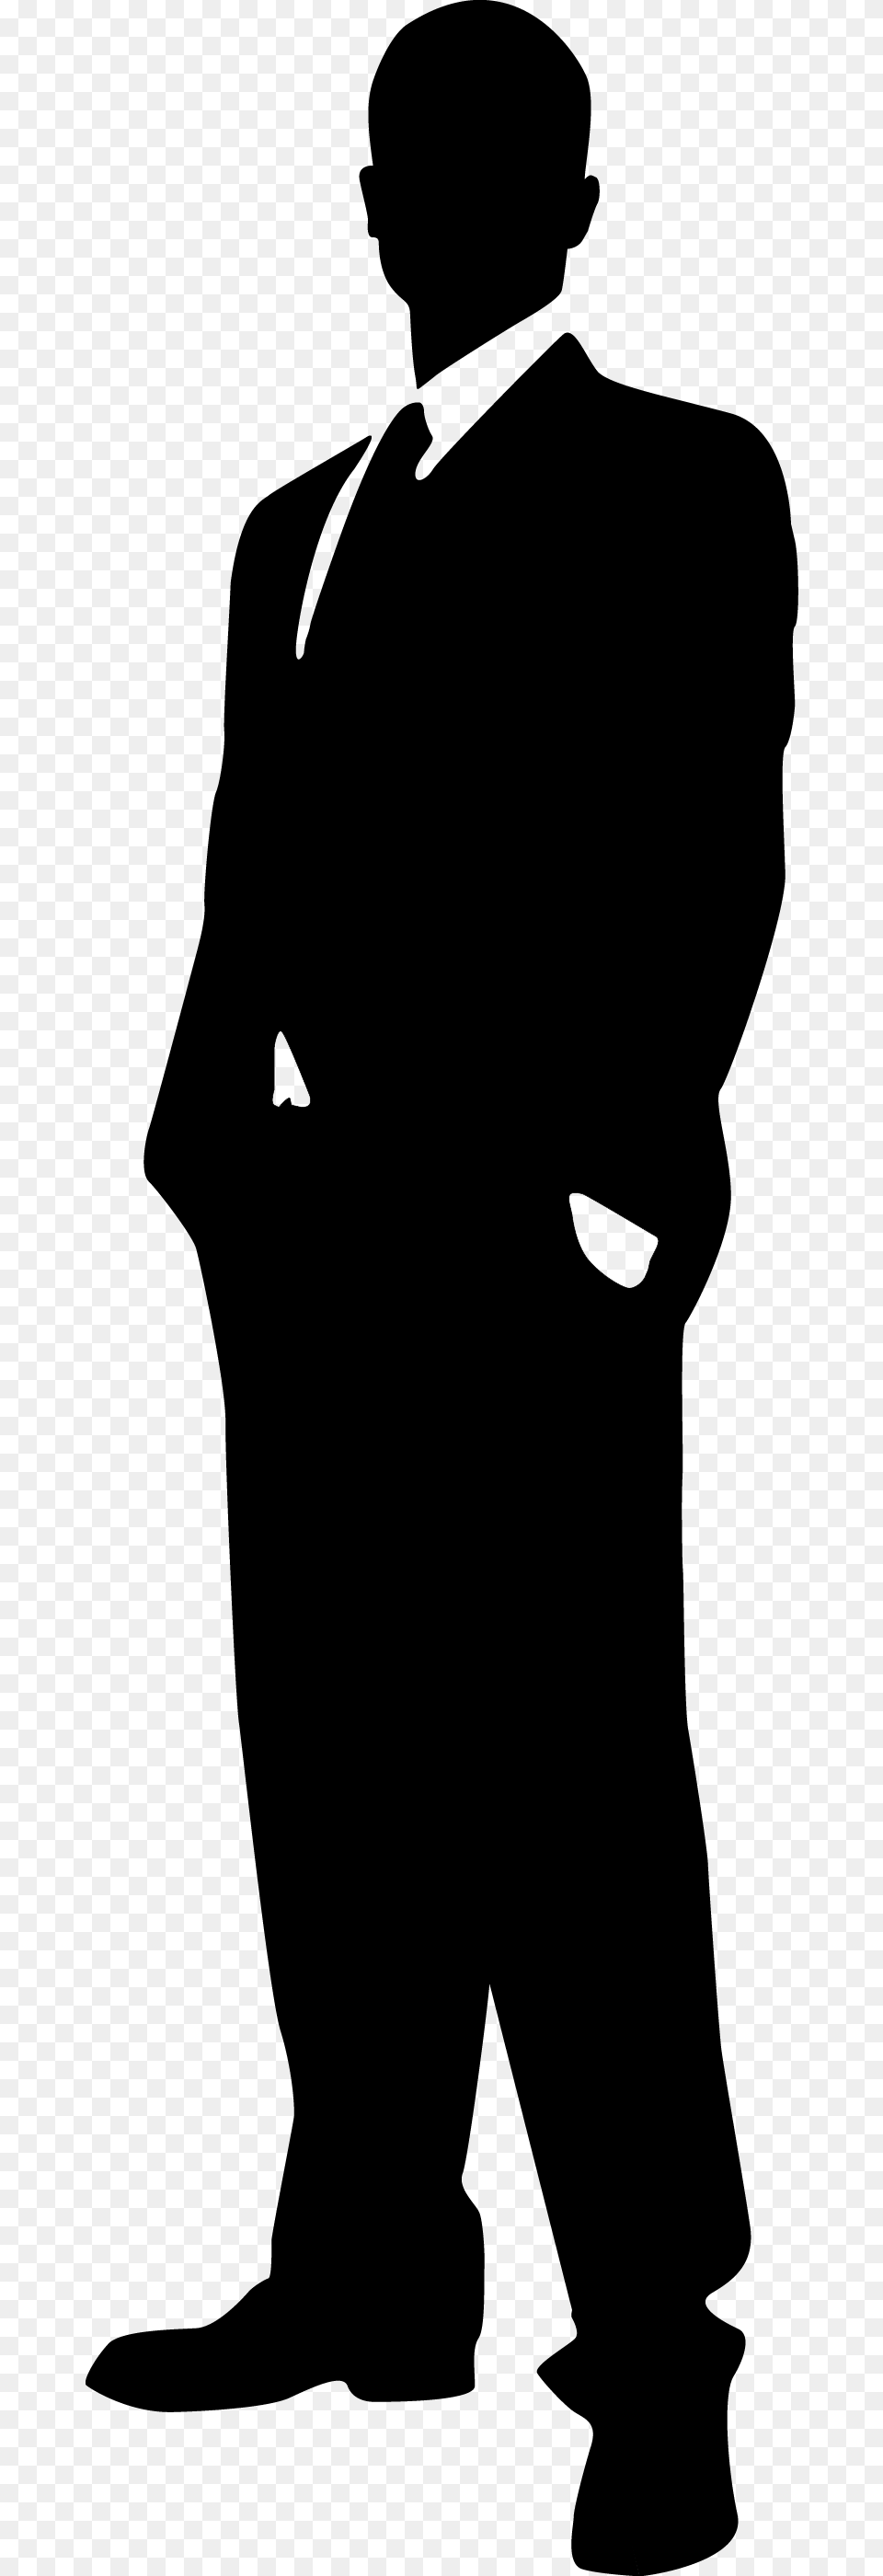 Person Clipart Silhouette At Getdrawings Com Man Silhouette Transparent, Formal Wear, Adult, Male, Clothing Free Png Download